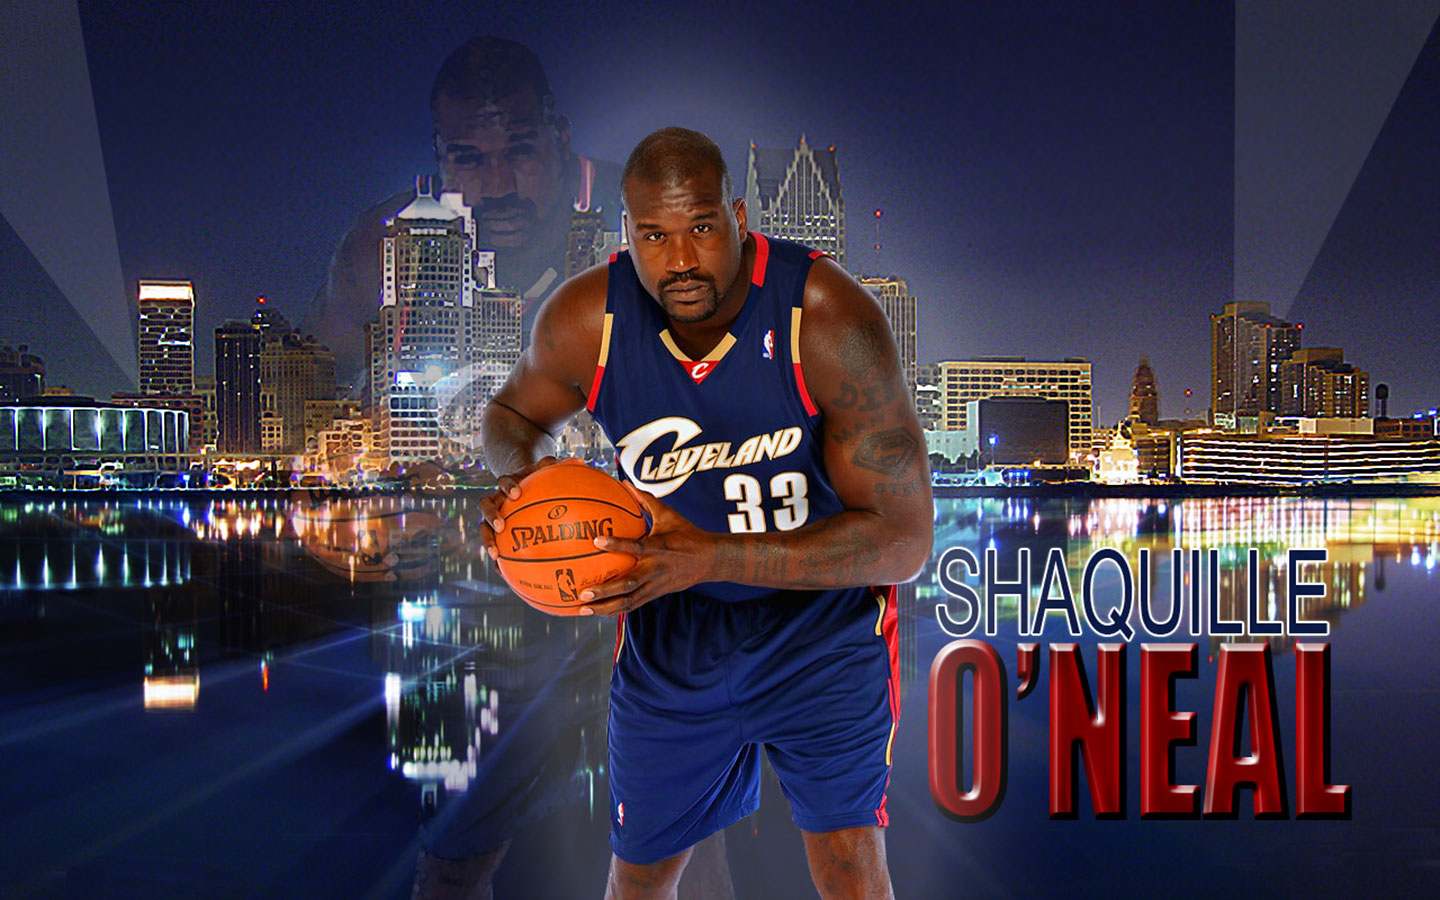 Shaquille O'Neal for the Cleveland Cavaliers.